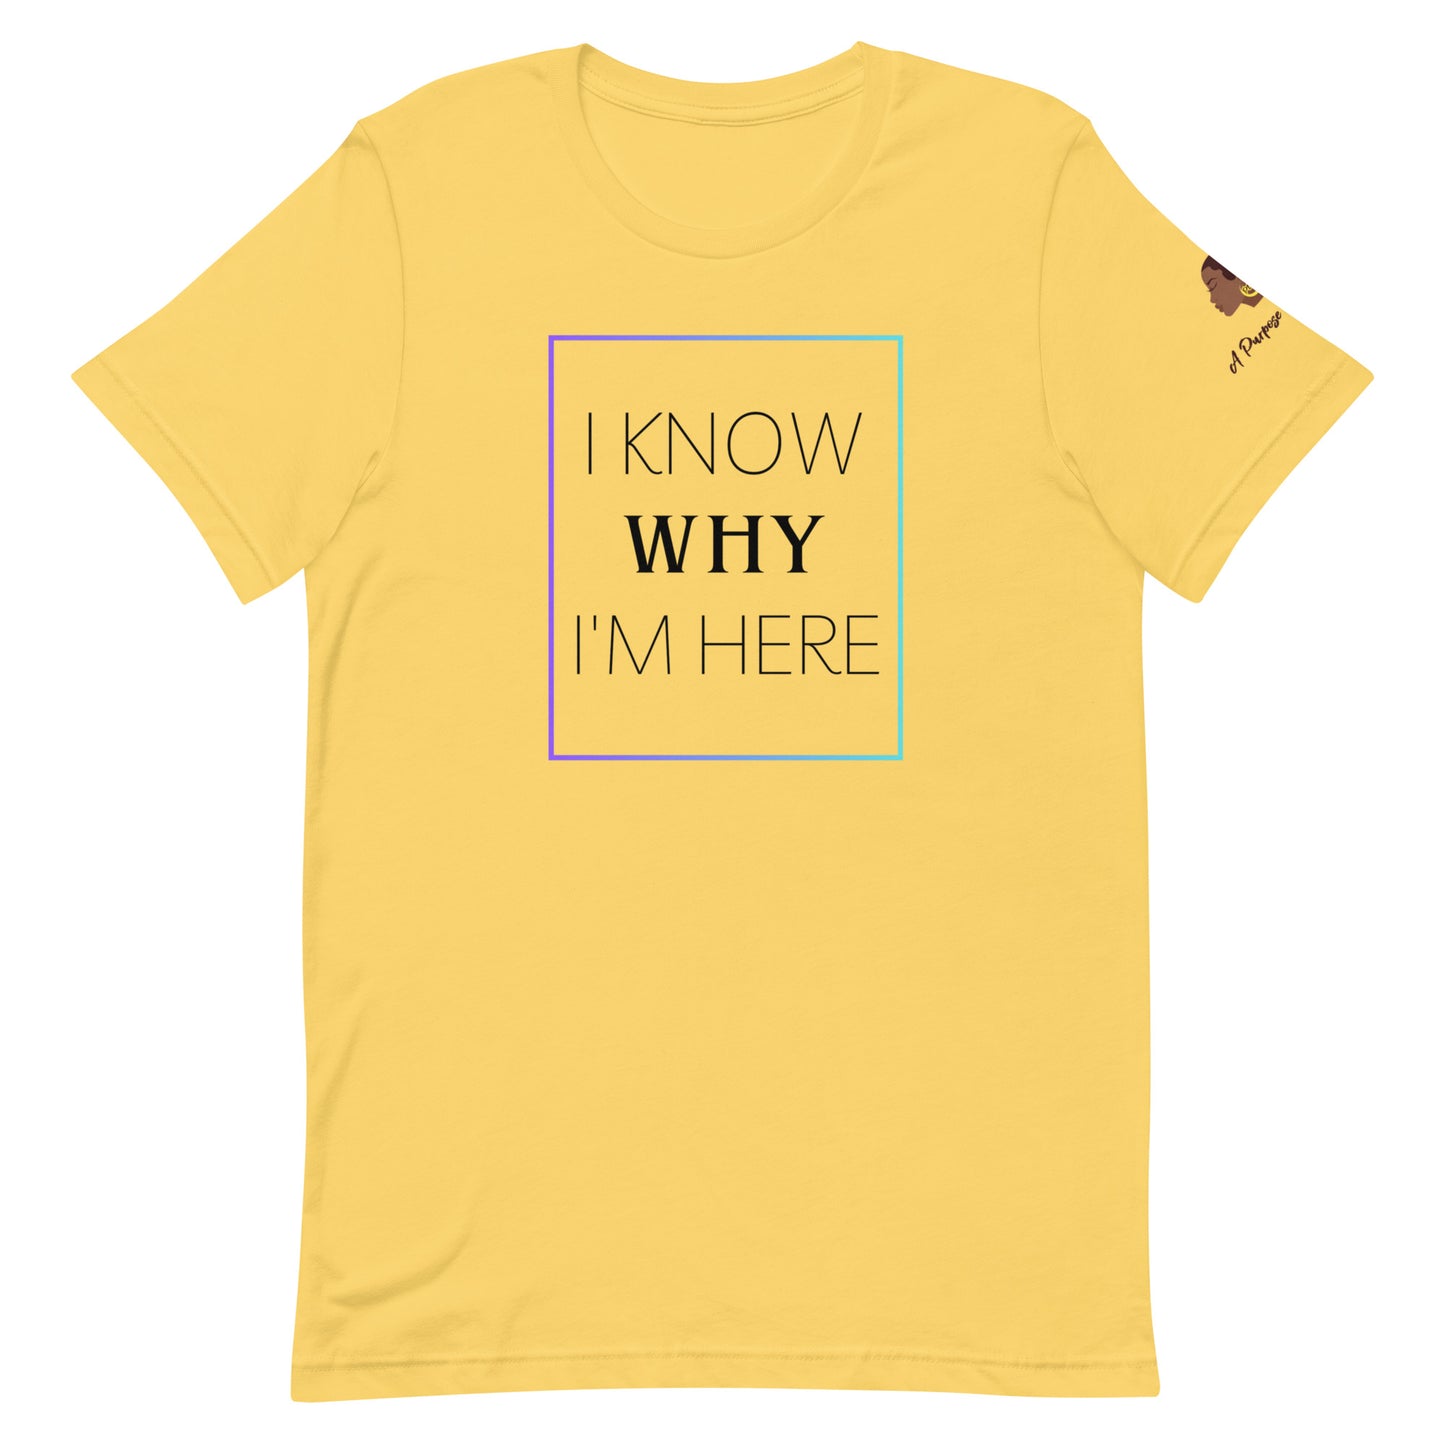 Purpose By Design Charity Tee- Why I'm Here